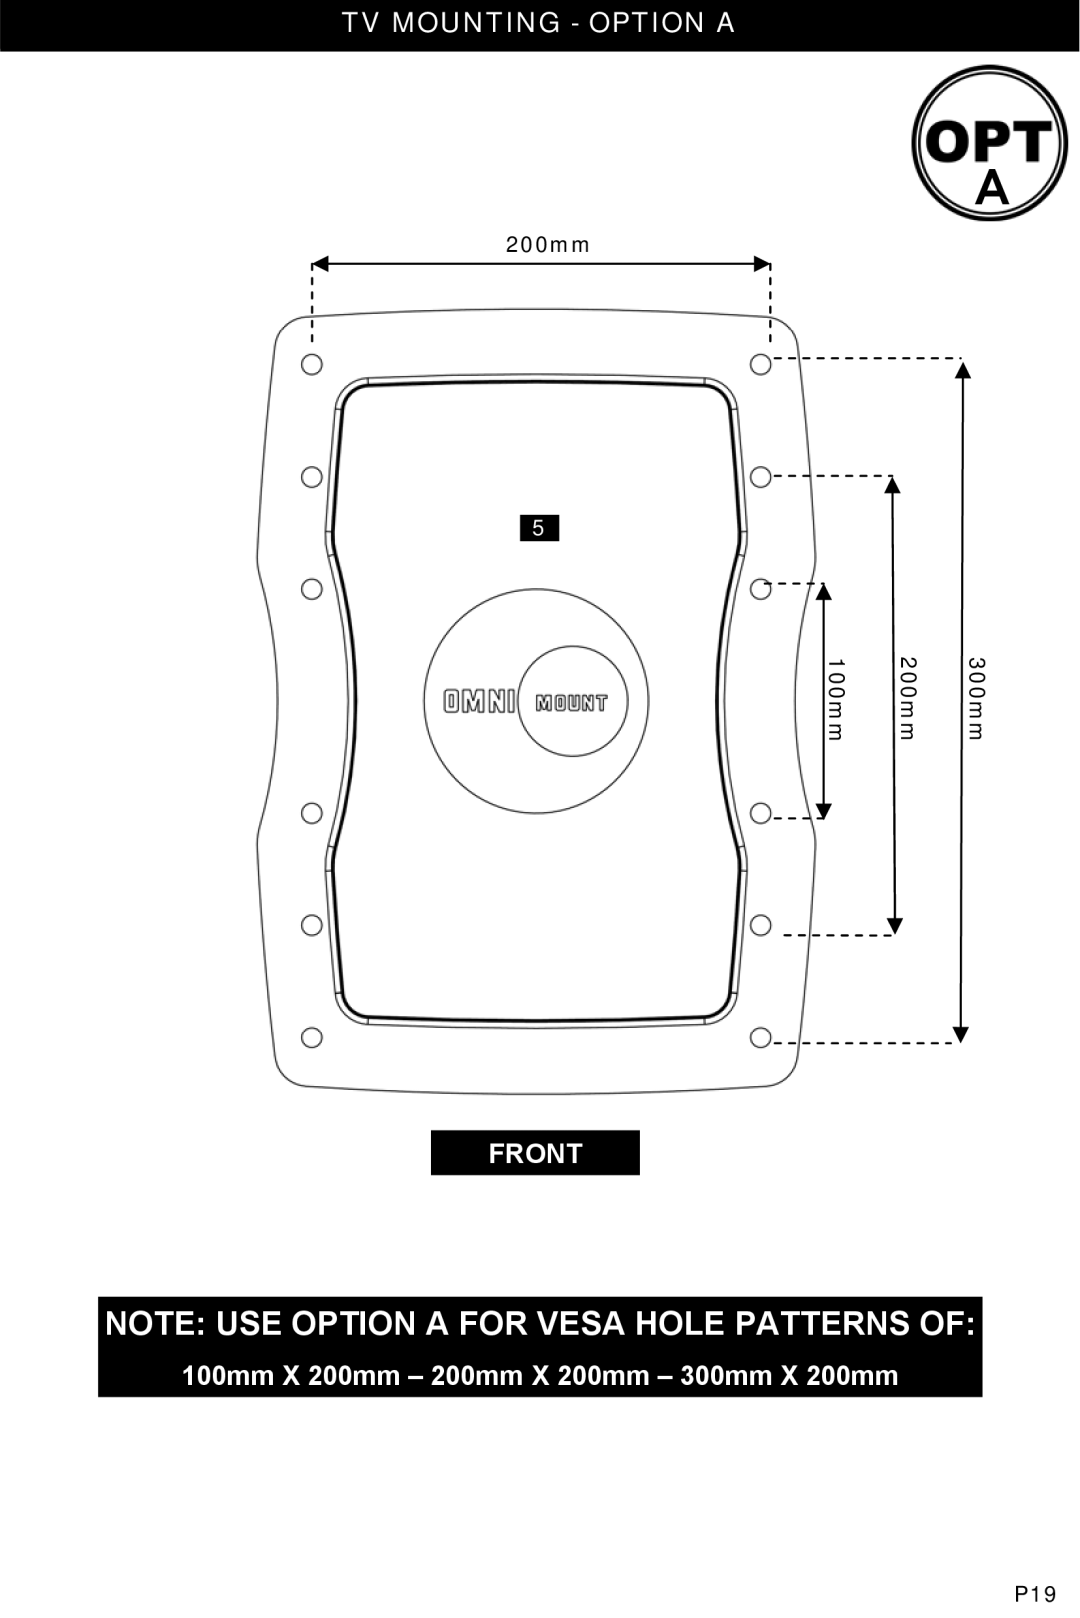 Omnimount OM1004107 Note Use Option A For Vesa Hole Patterns Of, Televisimountingmounting- Optionptionsa, Front, 200mm 